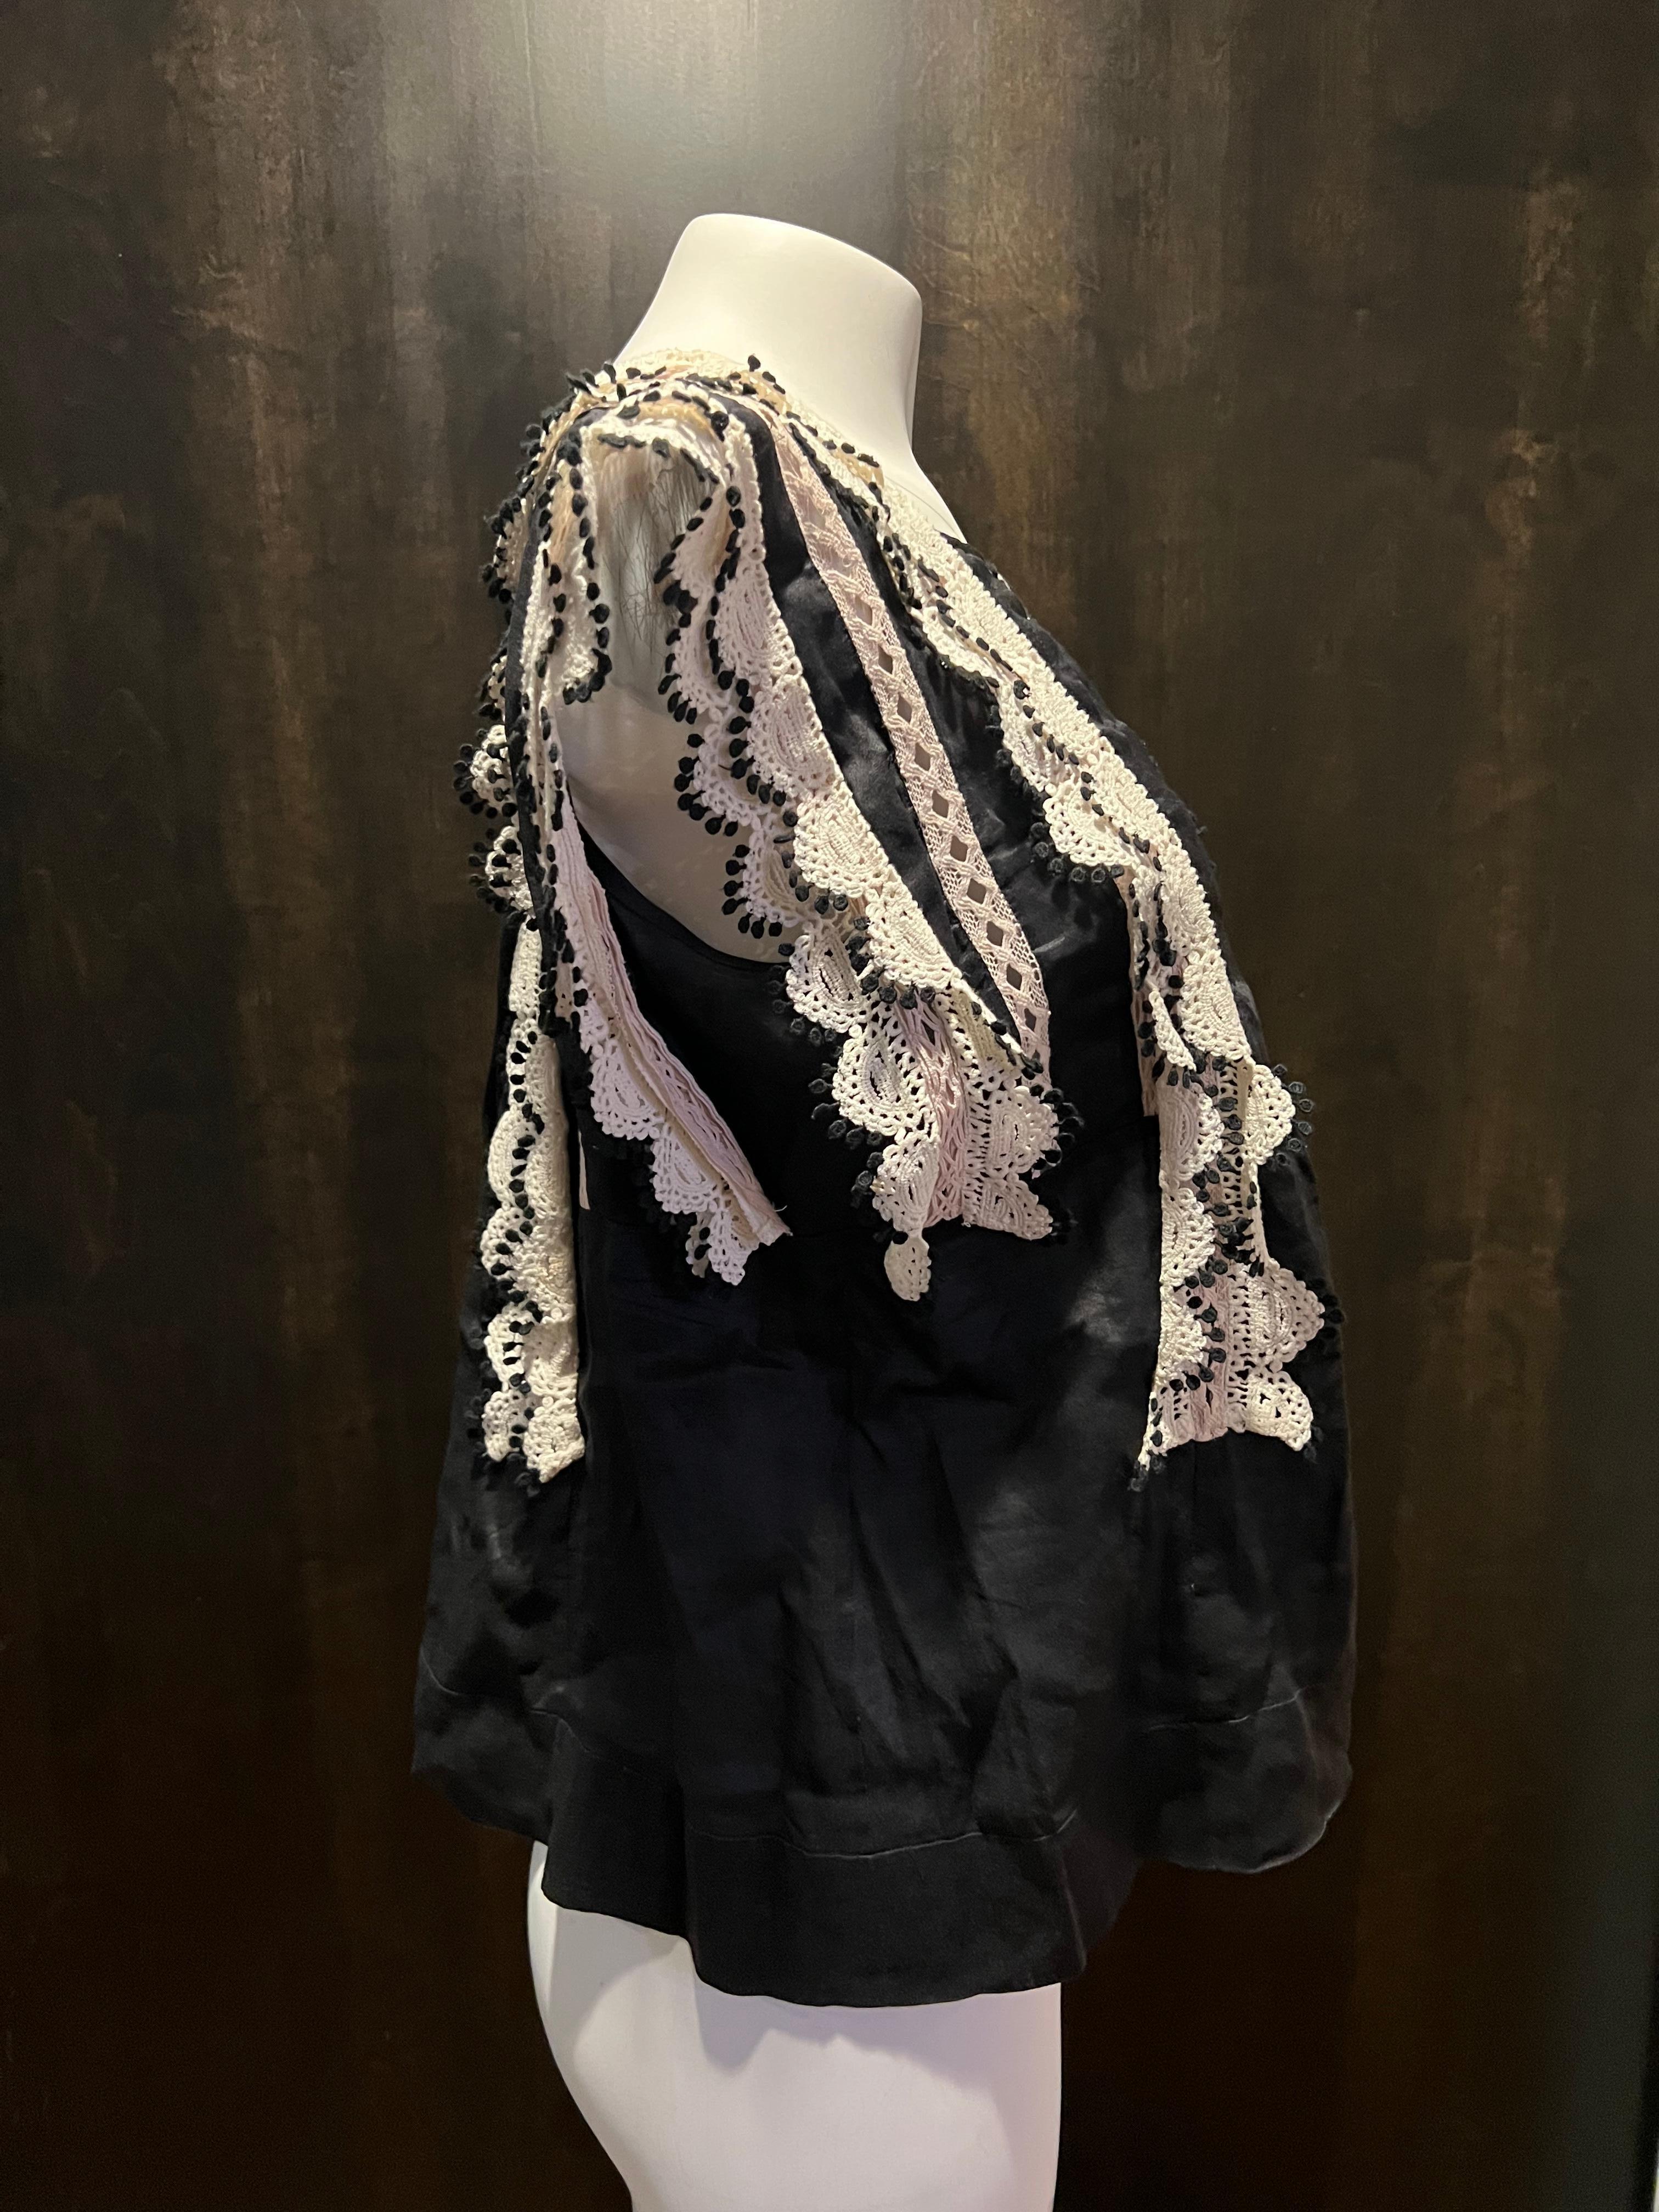 Isabel Marant Black and White Top Blouse, Size 40 In Excellent Condition For Sale In Beverly Hills, CA